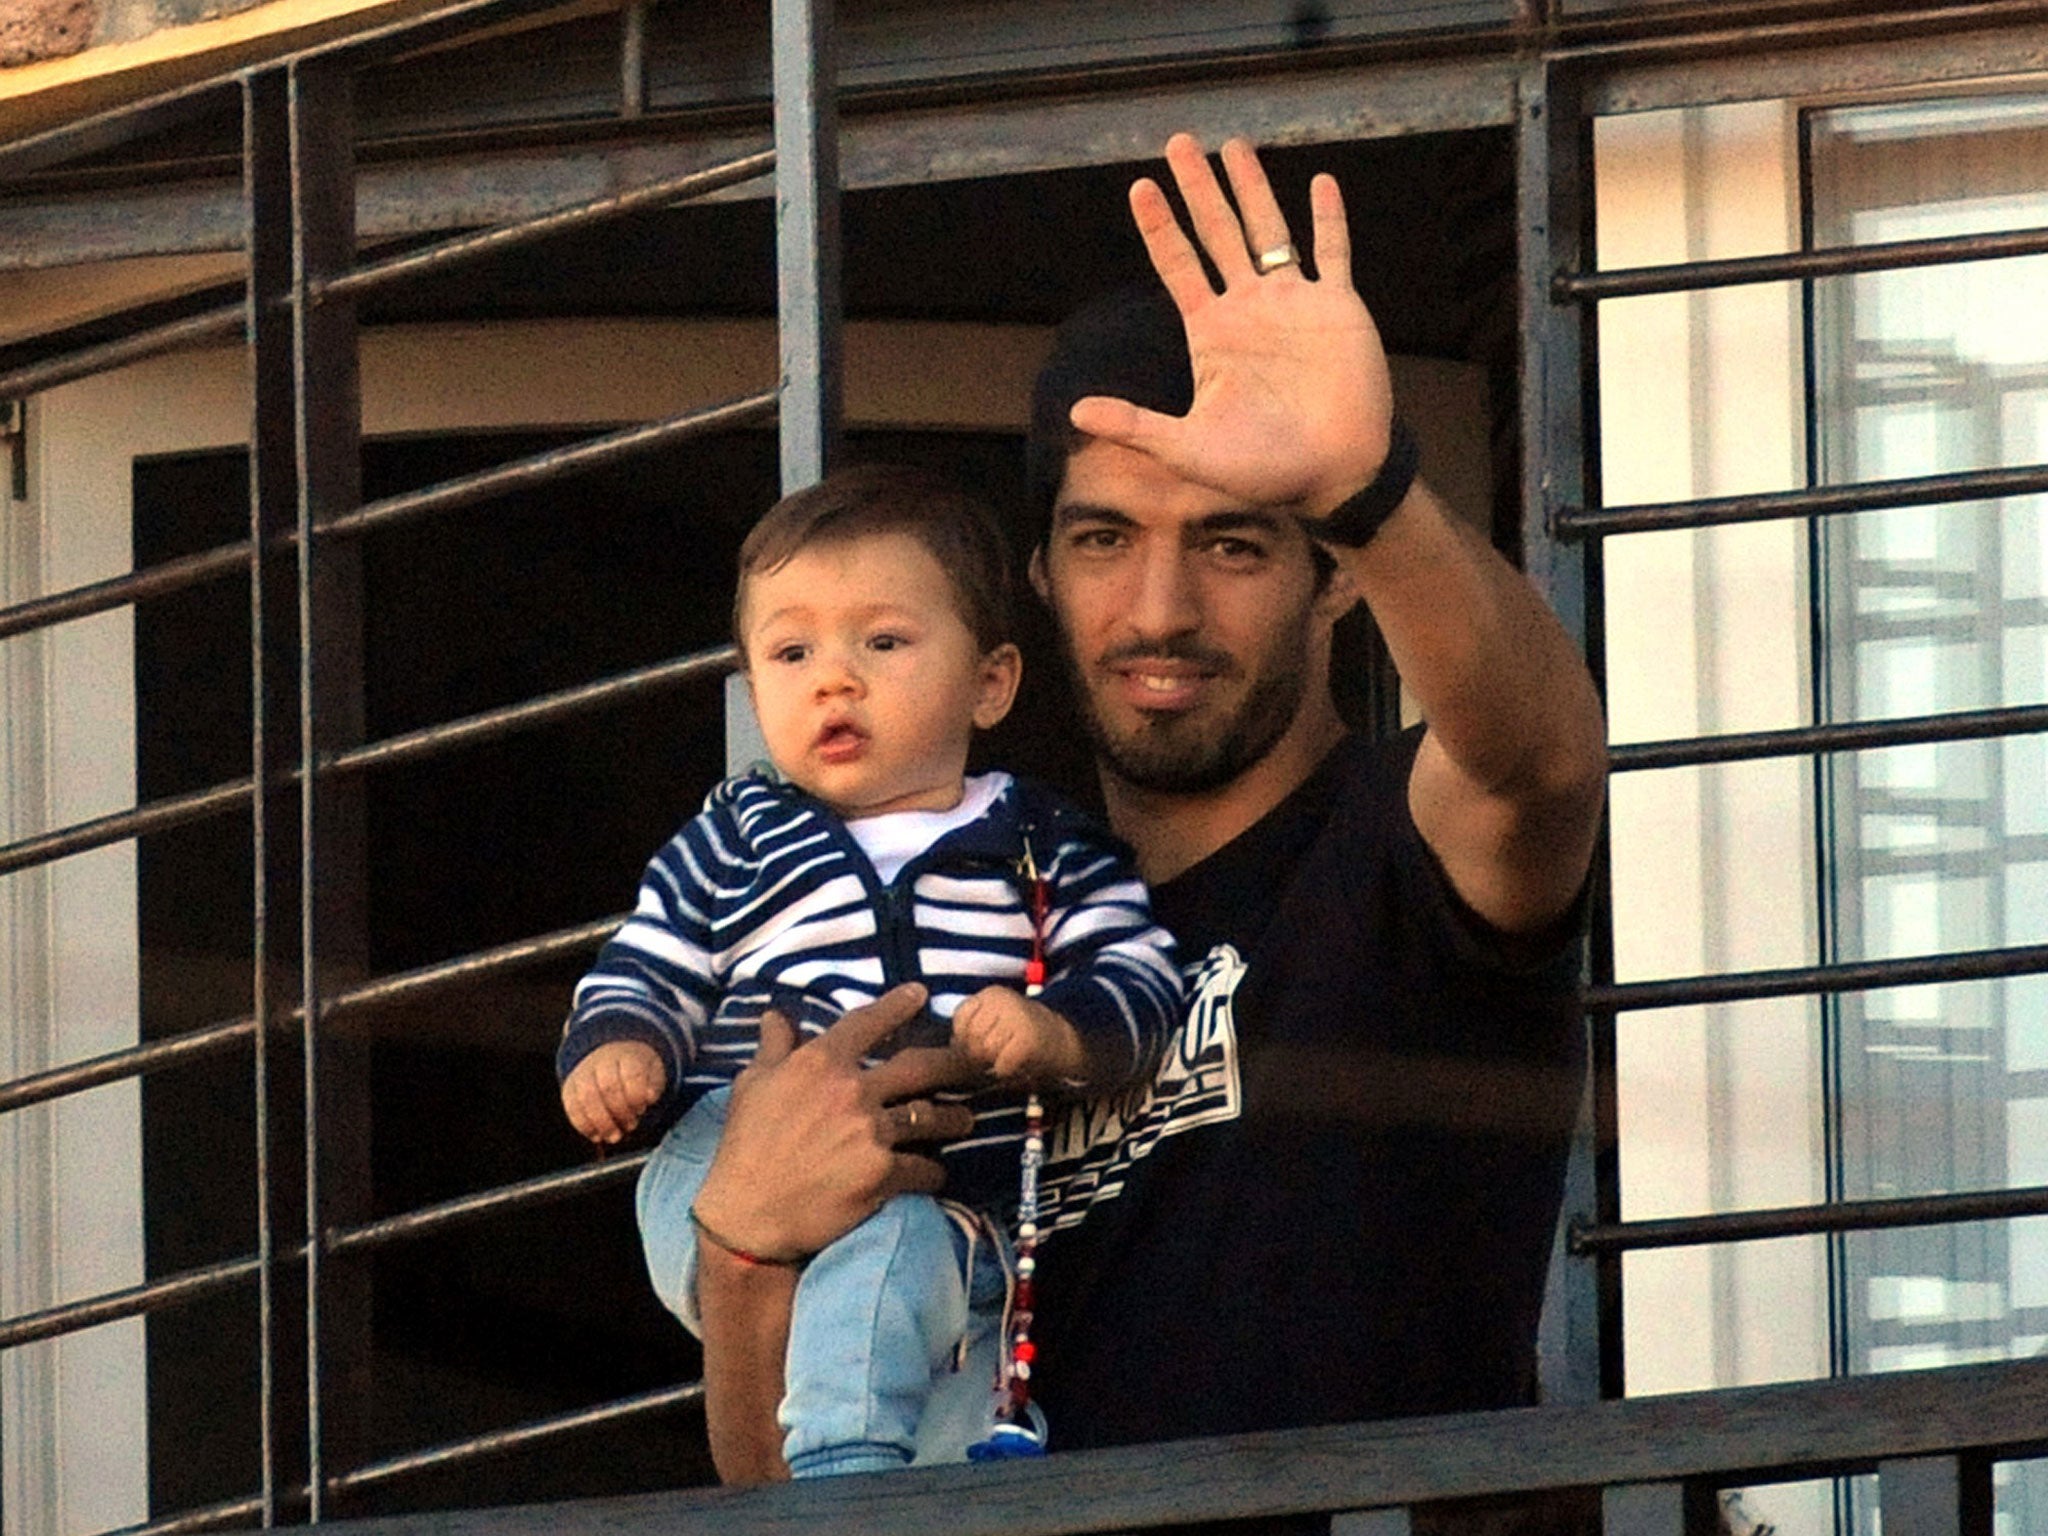 Luis Suarez is now back home in Uruguay